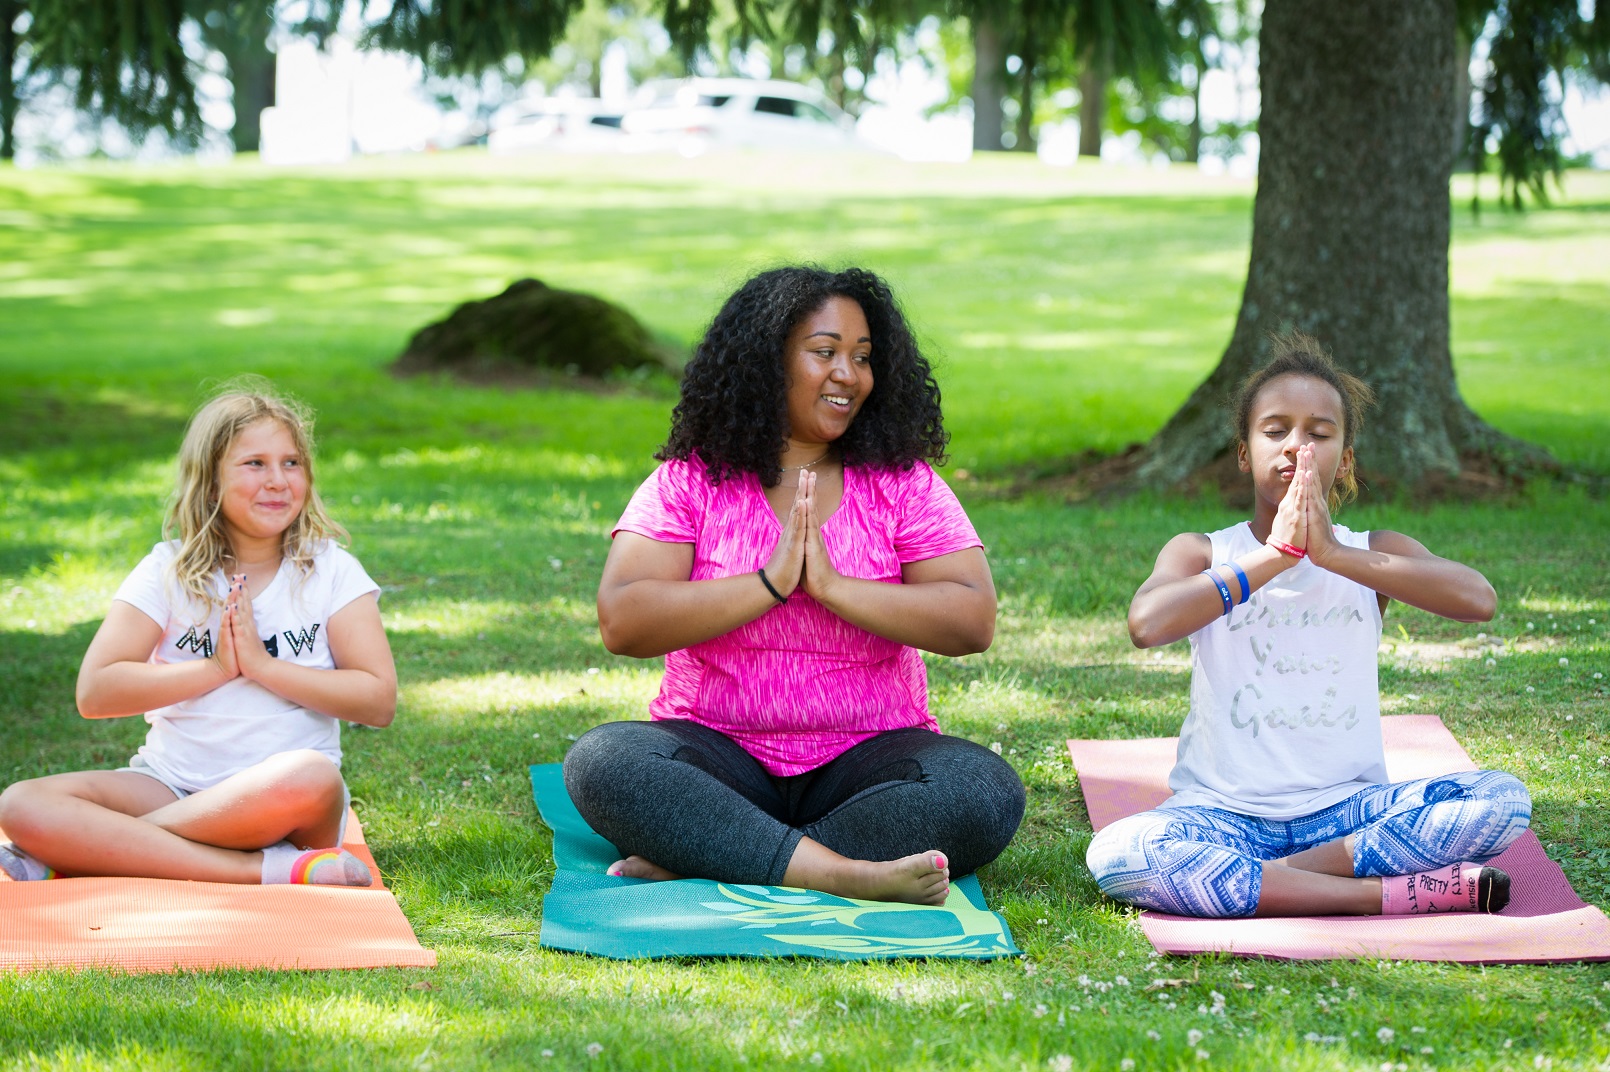 Our sleepaway camp Camp Poyntelle now offers mindfulness activities